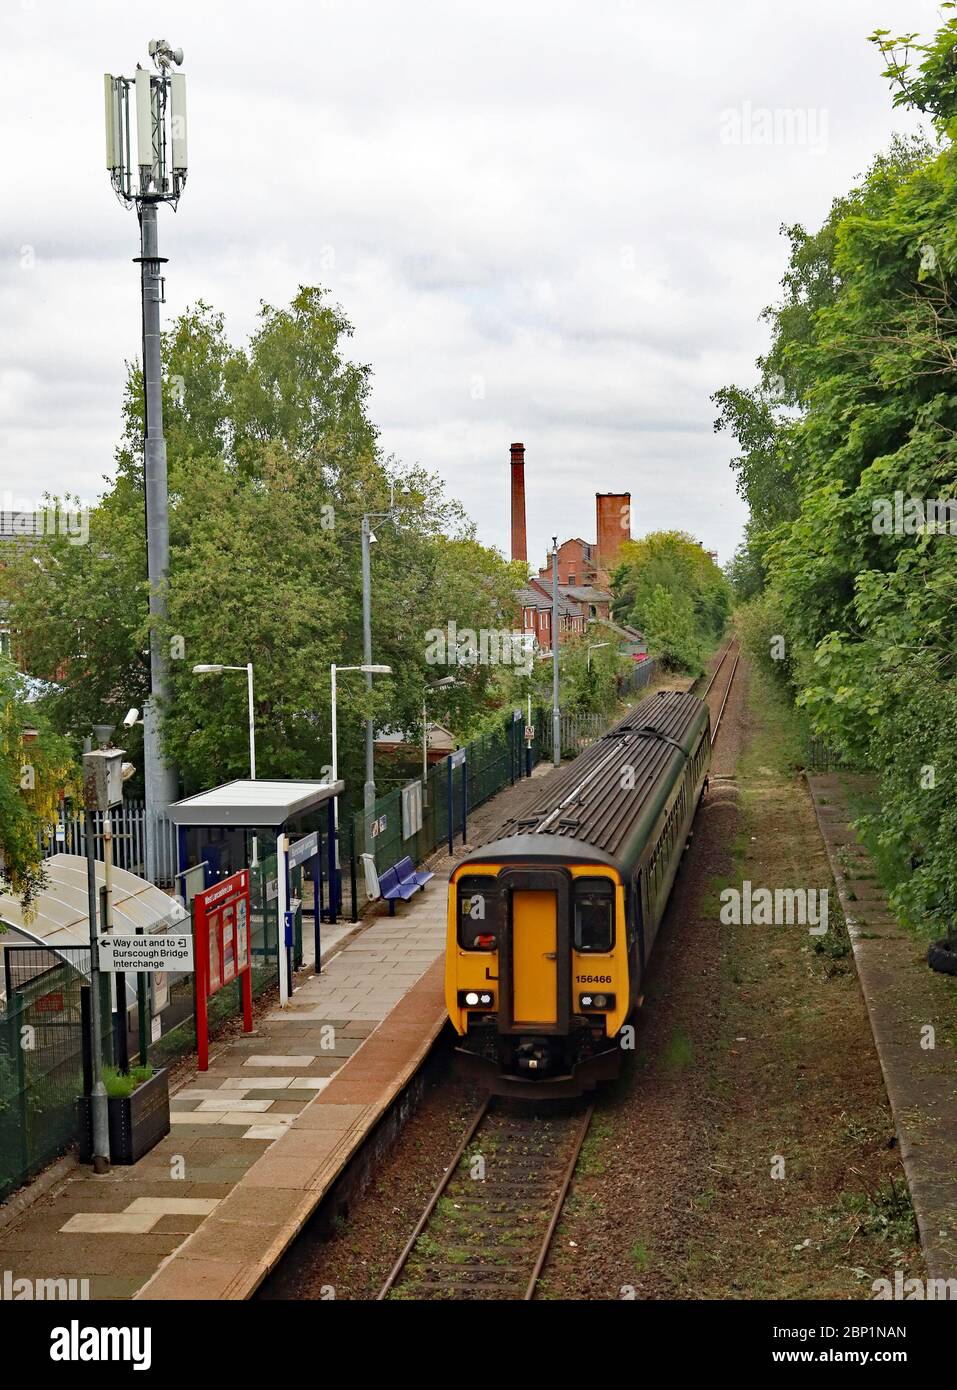 A train passes through Burscough Junction station with a route refresher train in readiness for restarting passenger services along this branch line. Stock Photo